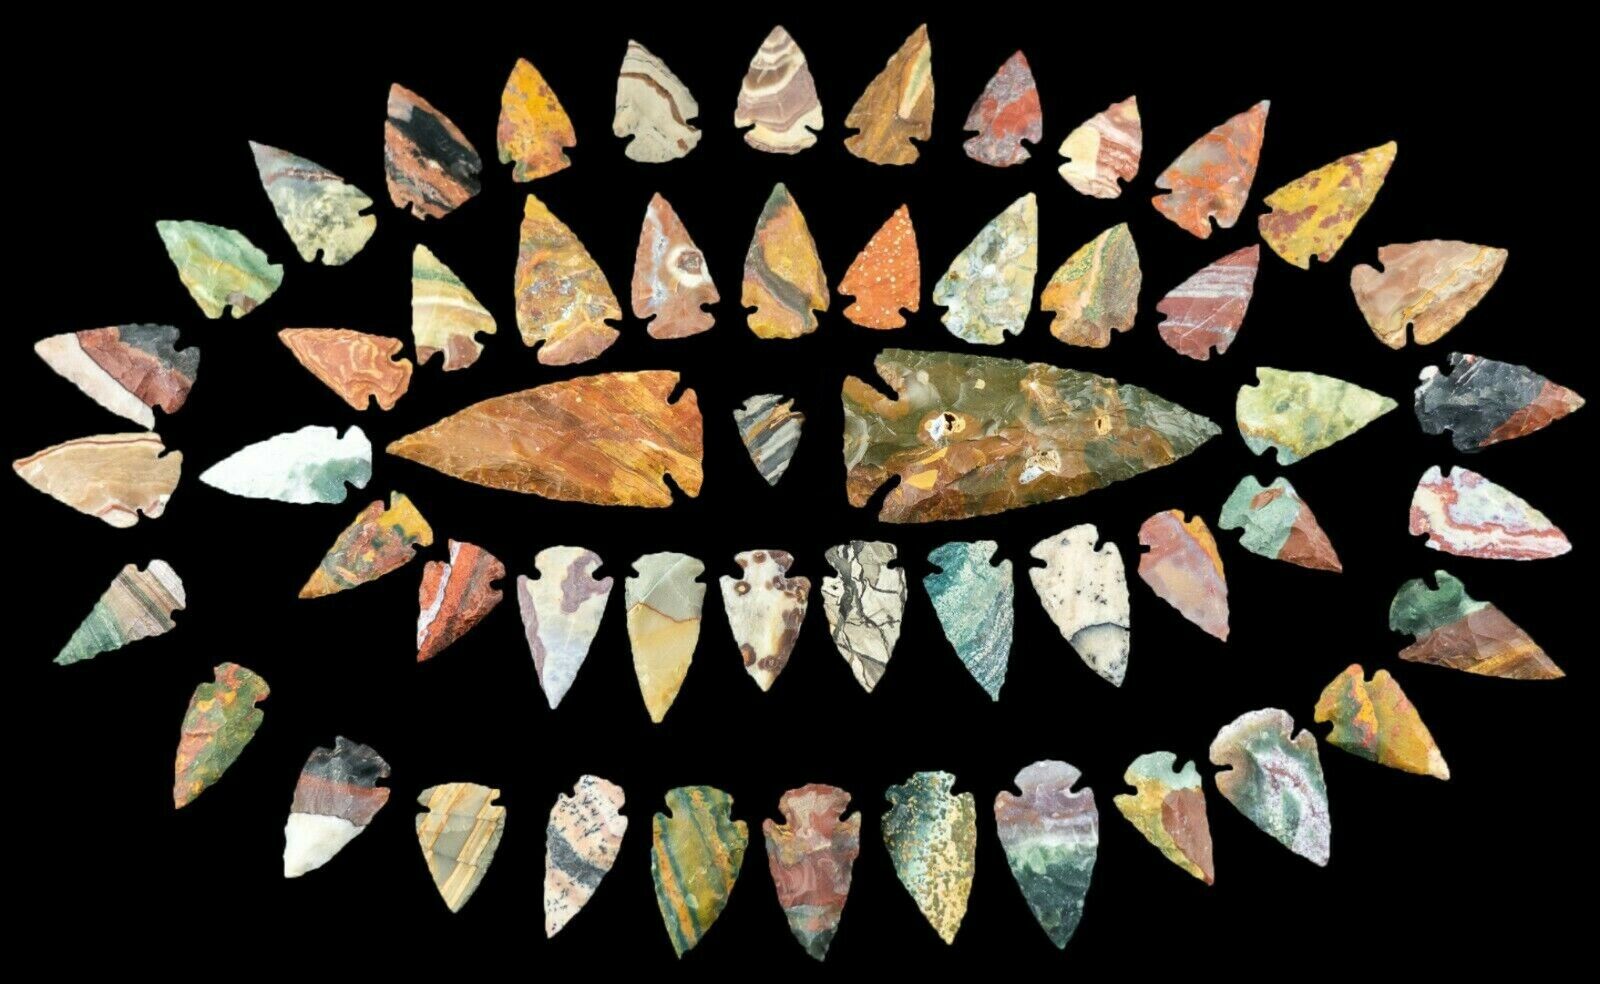 ** 52 pc lot Flint Arrowhead Ohio Collection Project Spear Points Knife Blade **